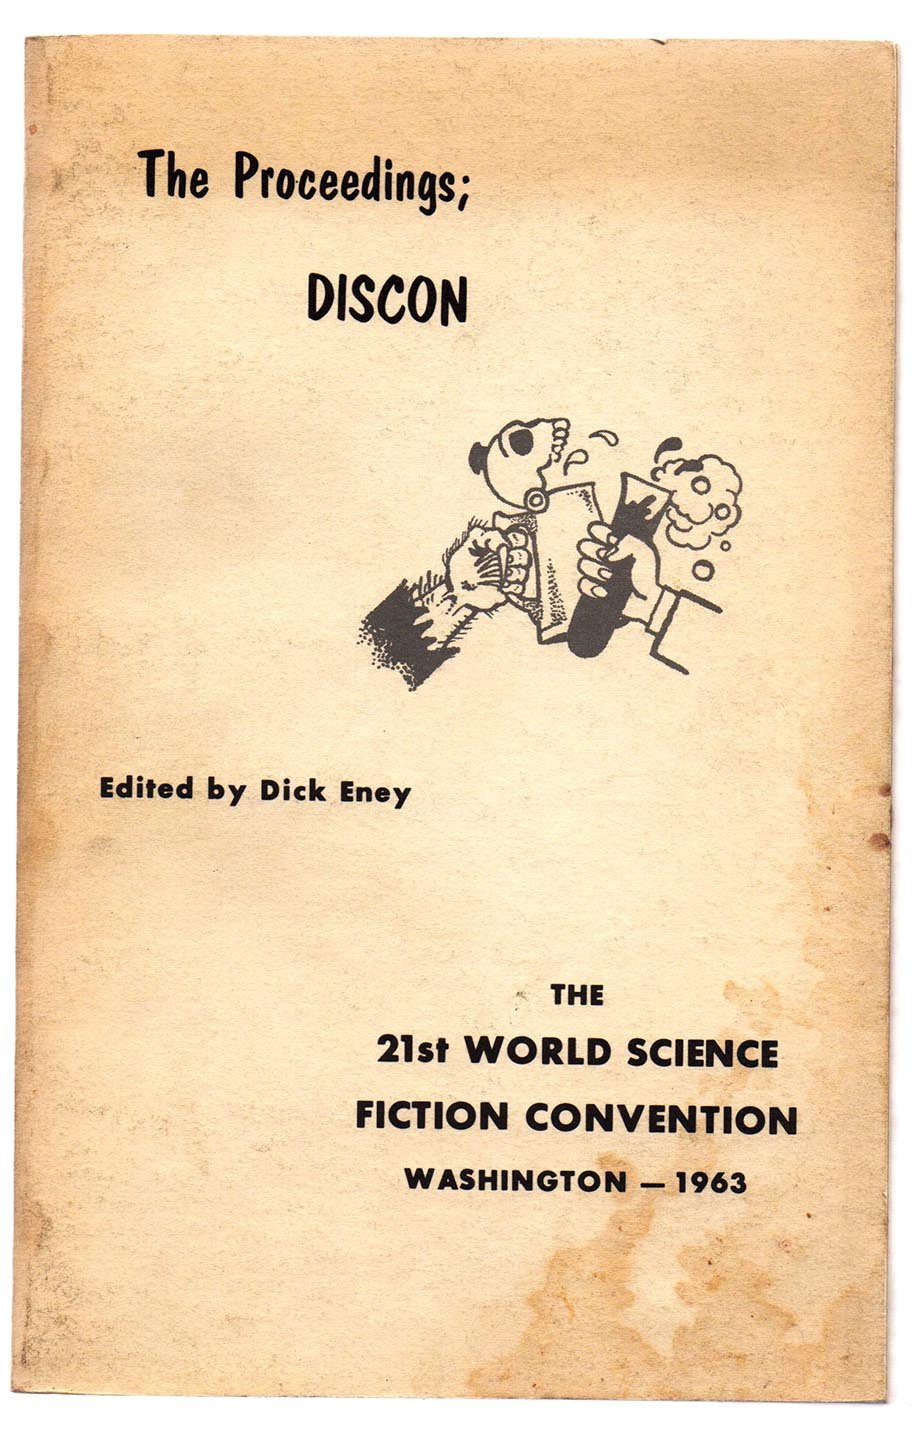 The Proceedings; DISCON. The 21st World Science Fiction Convention, Washington, 1963